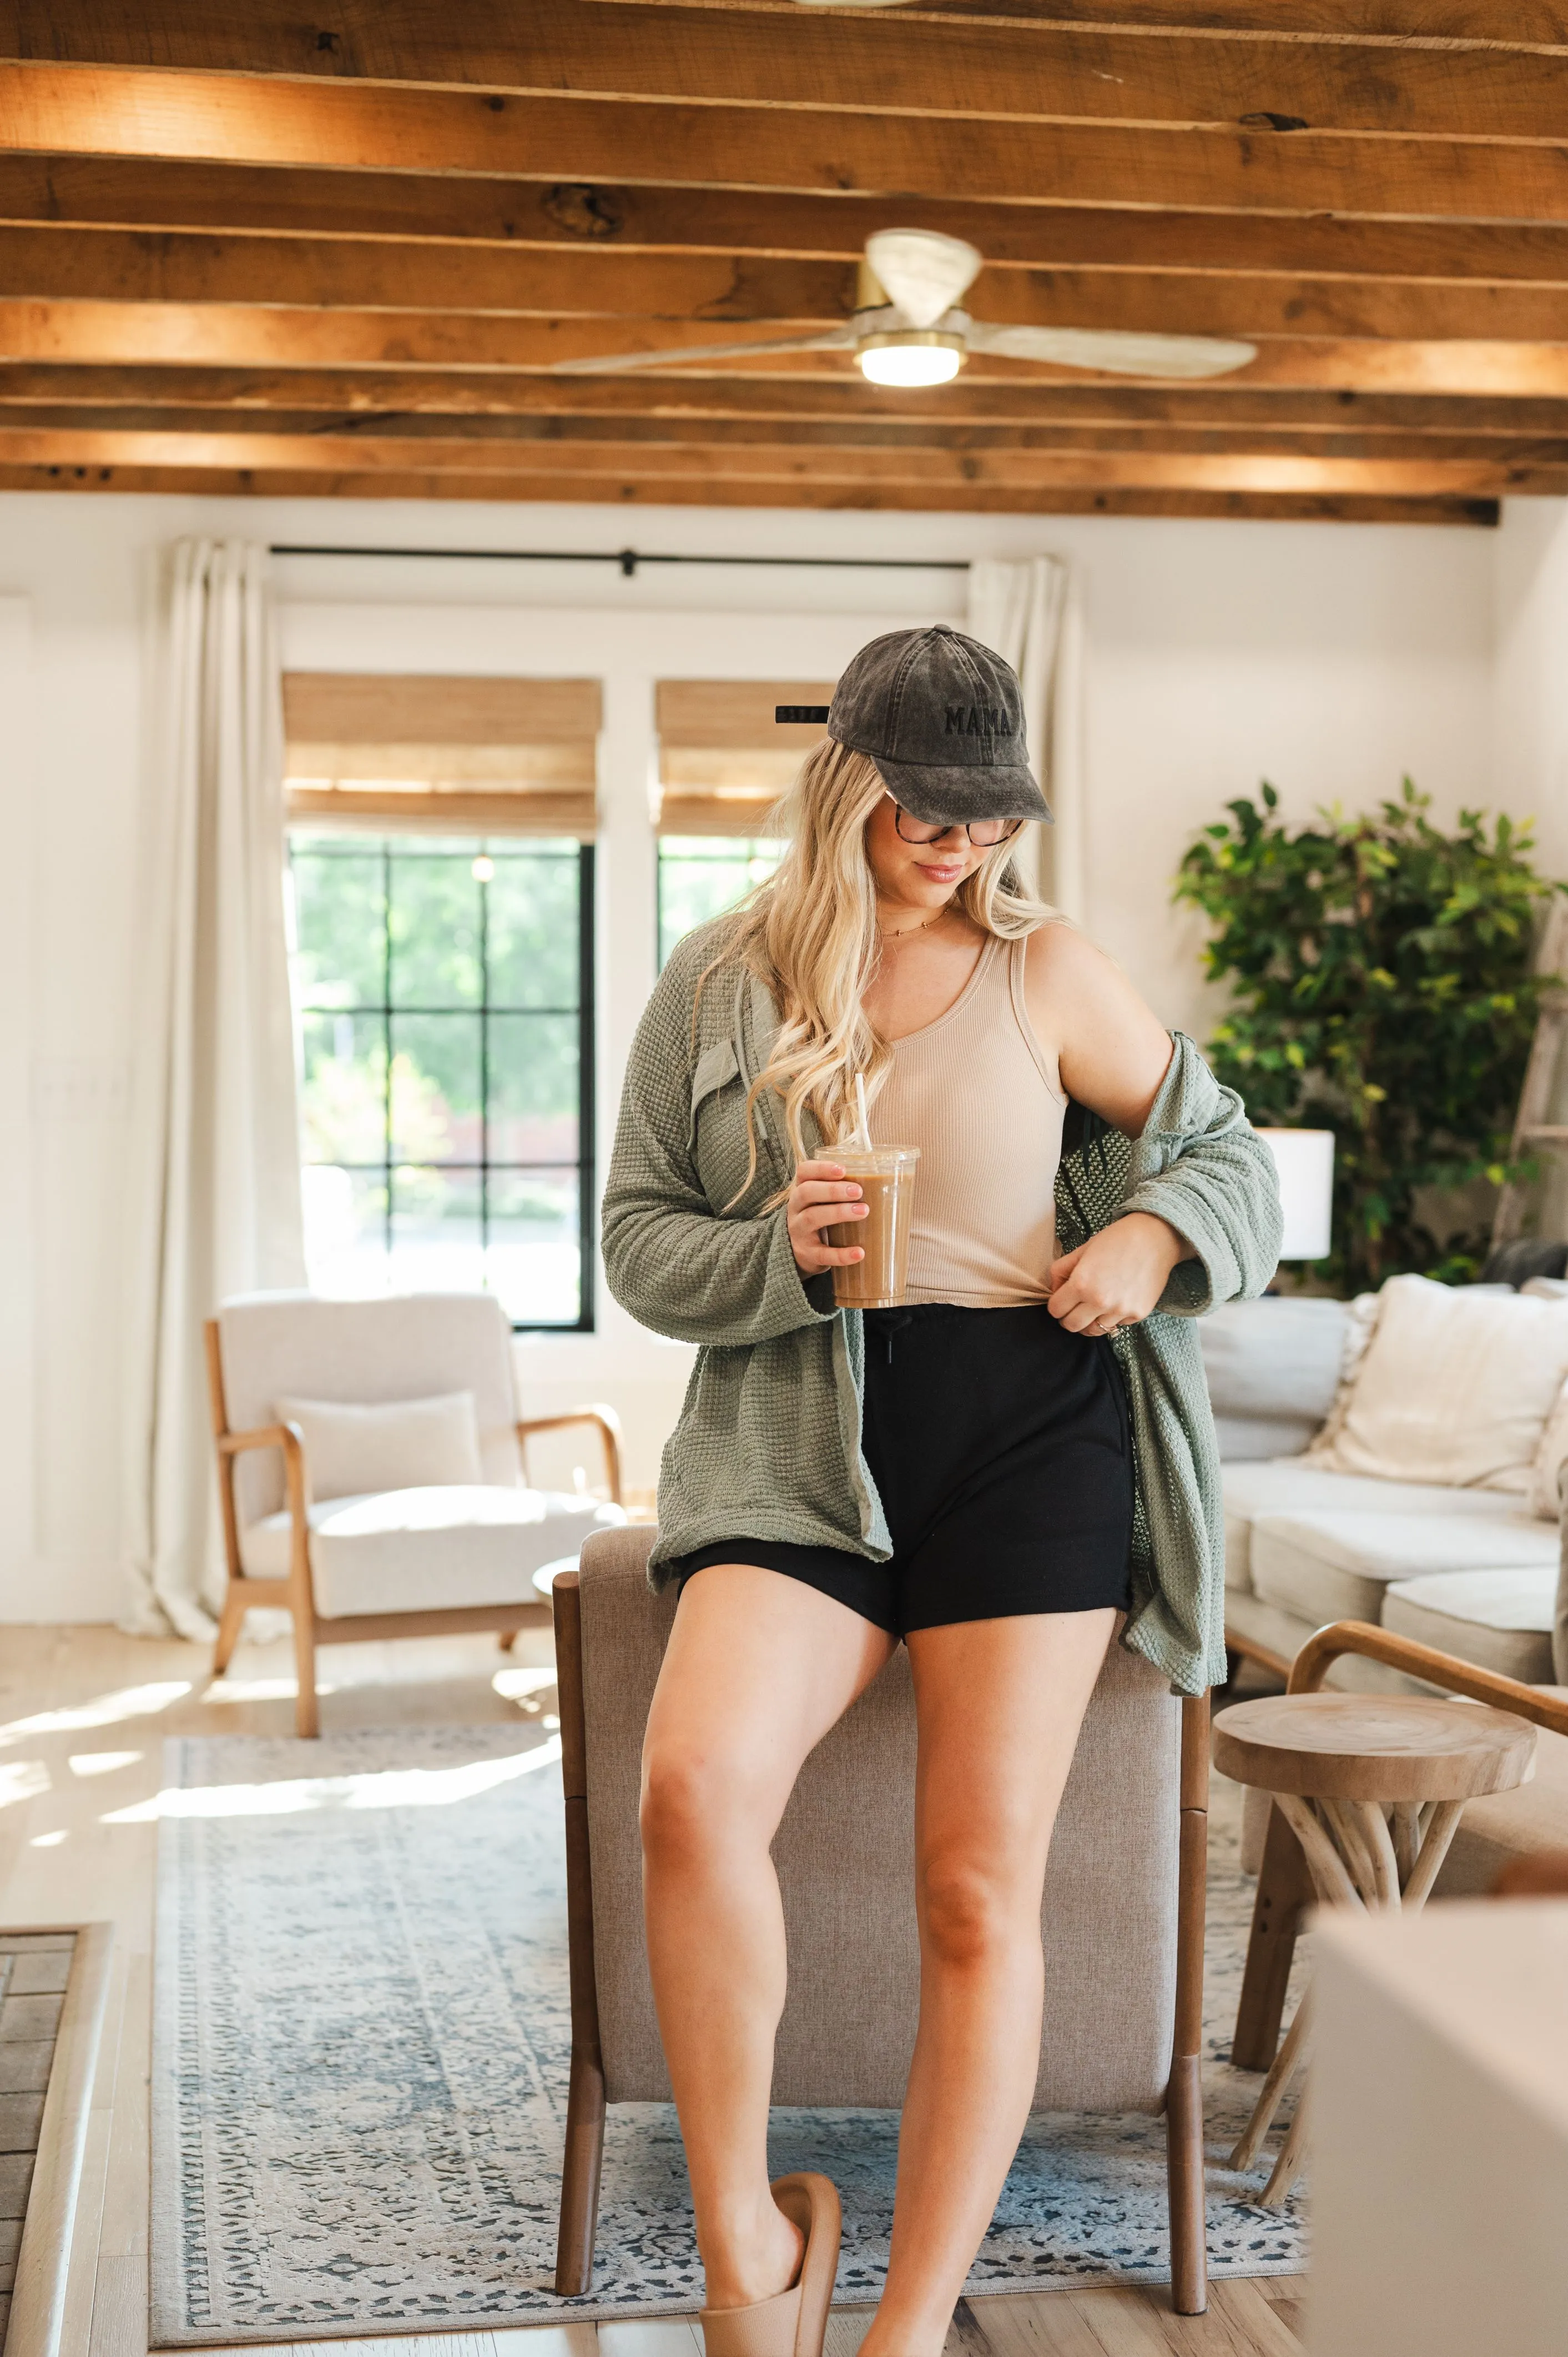 Woman in a casual outfit with a cap, holding a coffee cup, standing indoors in a cozy living room with wooden accents.